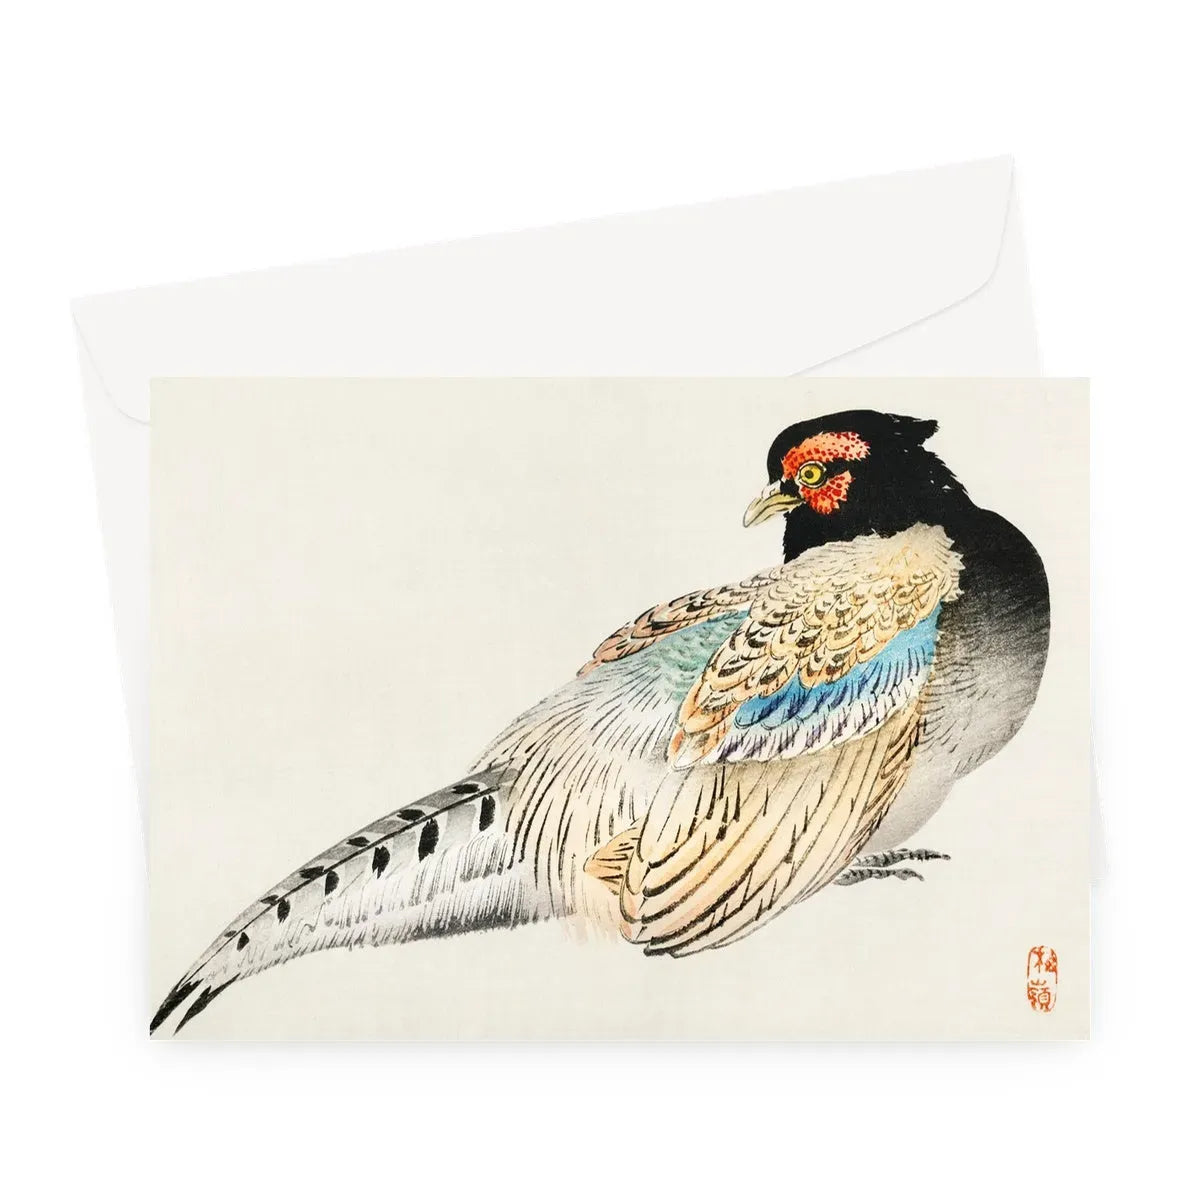 Peregrine Falcon By Kōno Bairei Greeting Card - A5 Landscape / 1 Card - Greeting & Note Cards - Aesthetic Art